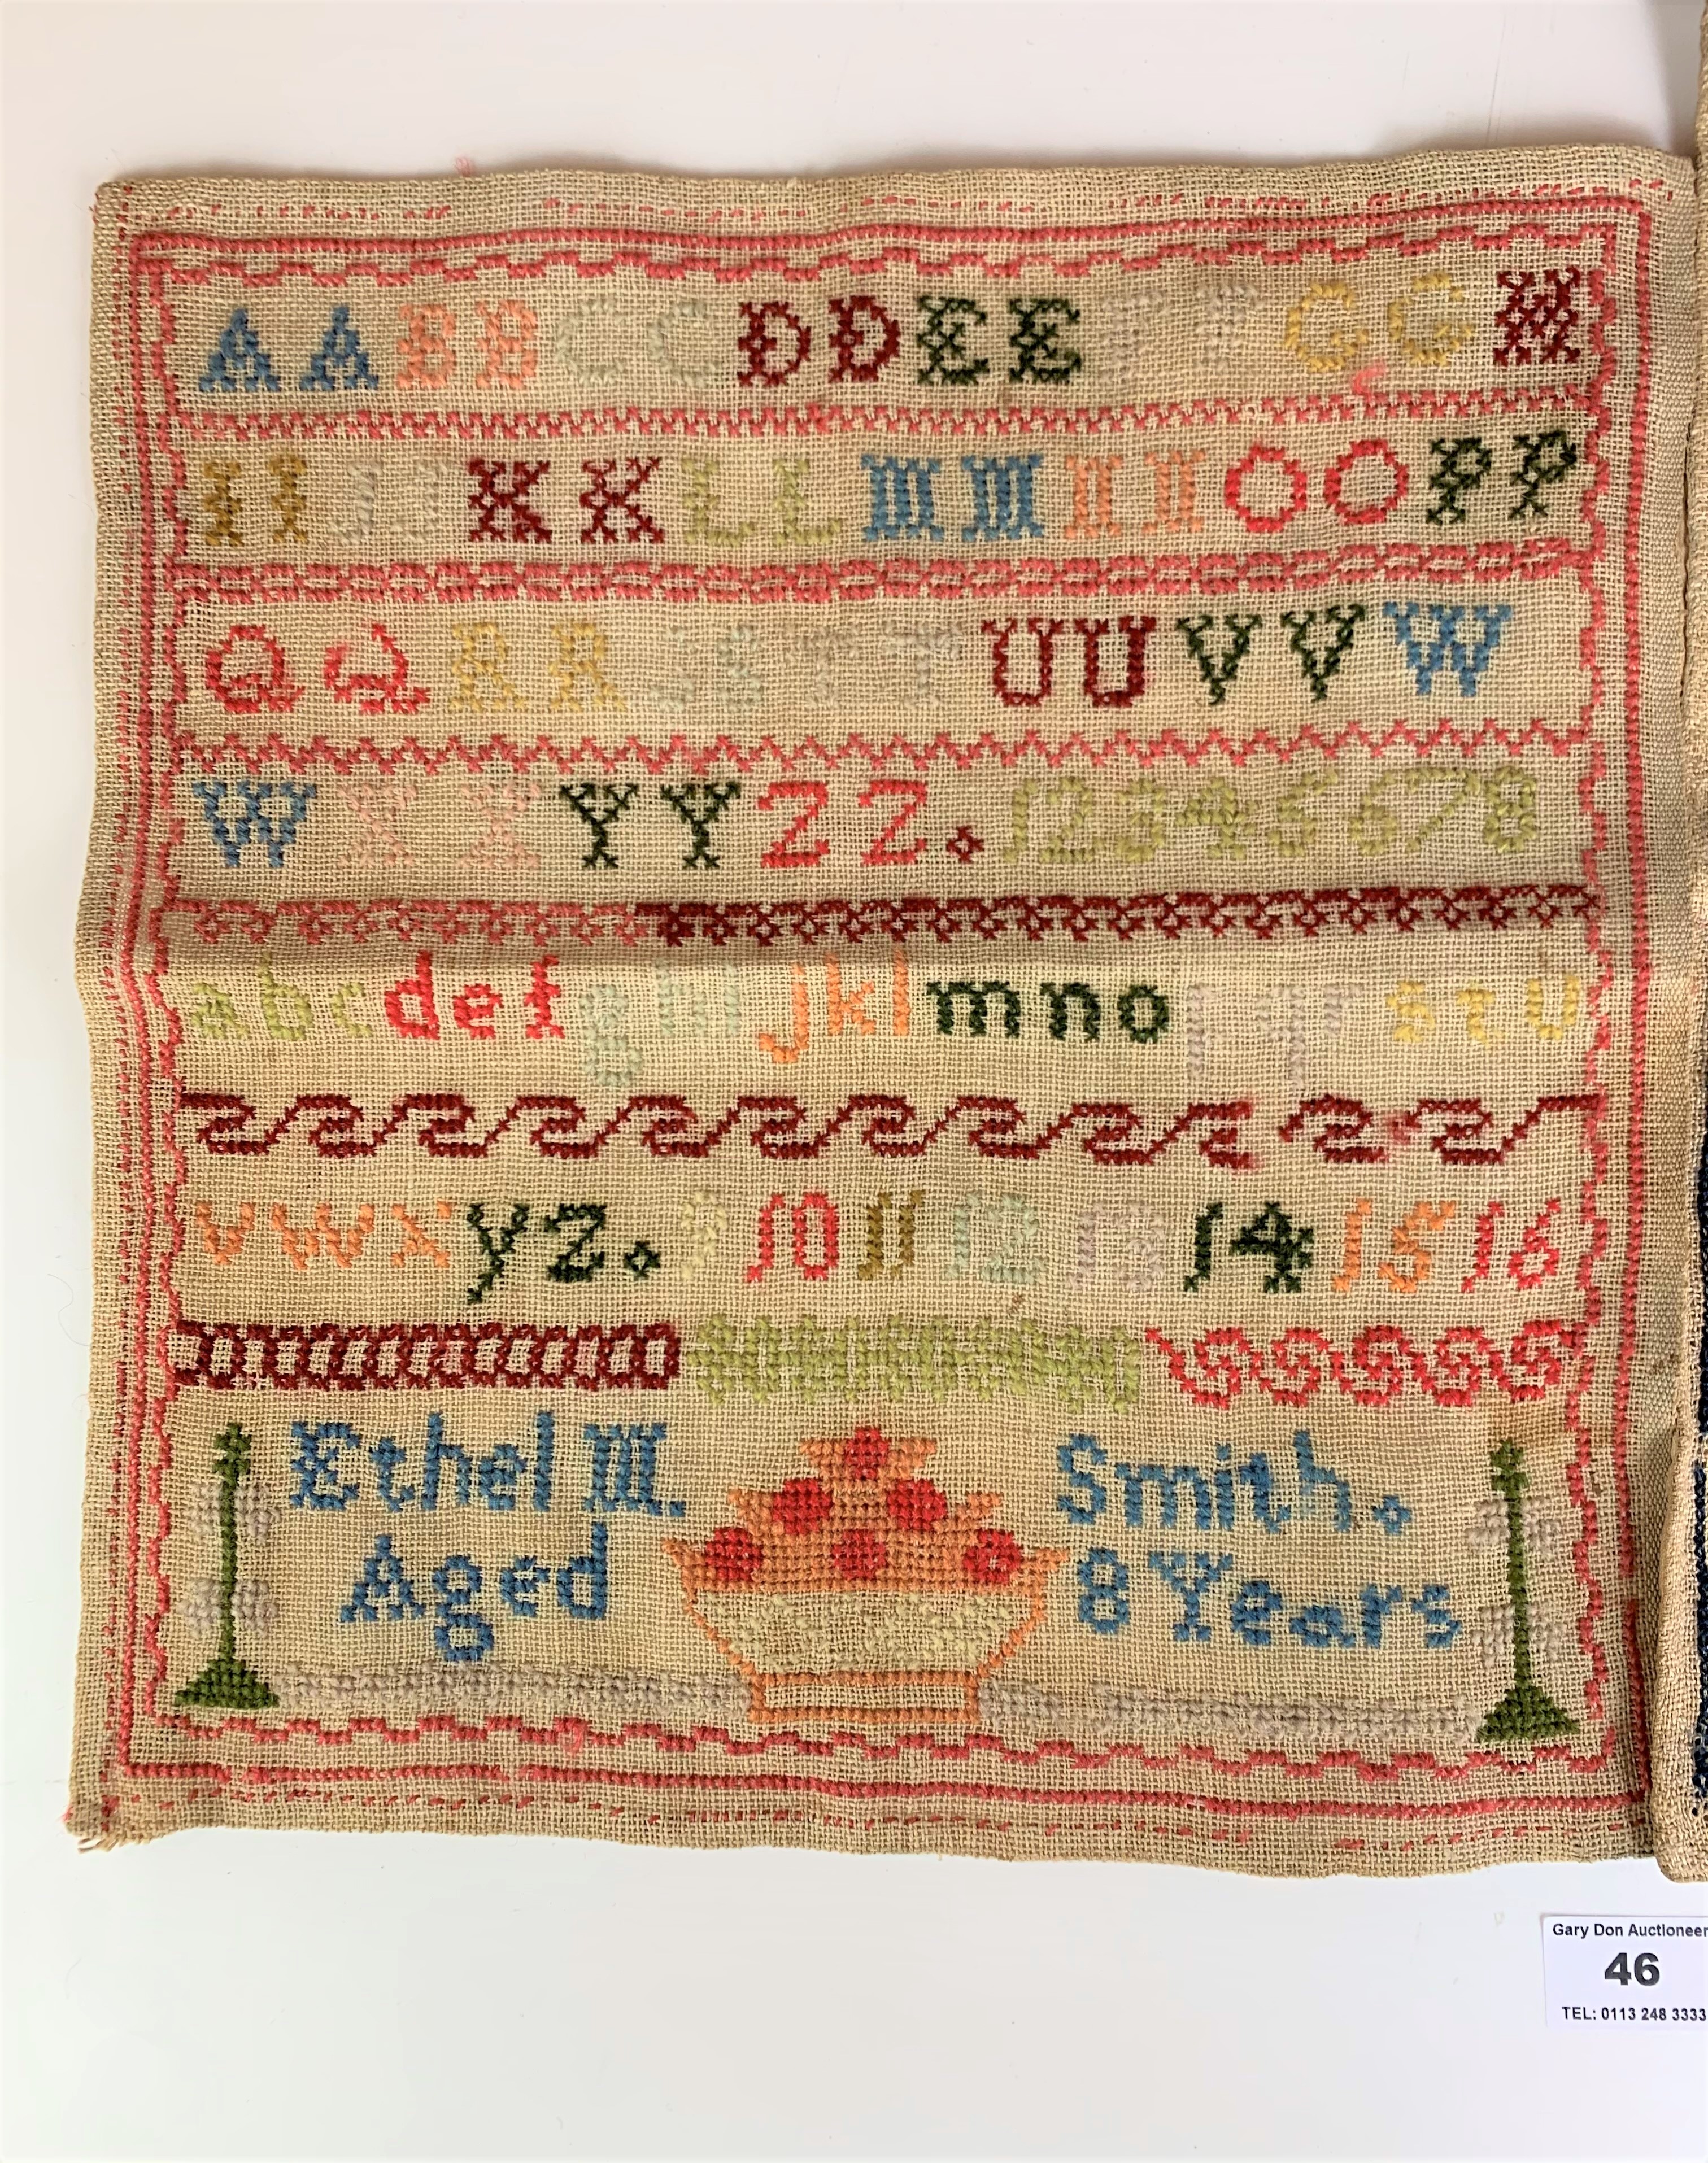 2 samplers – Ellen Wilkes 1860 with lined back 11” x 13.5” and Ethel M. Smith, aged 8 years 12” x - Image 3 of 5